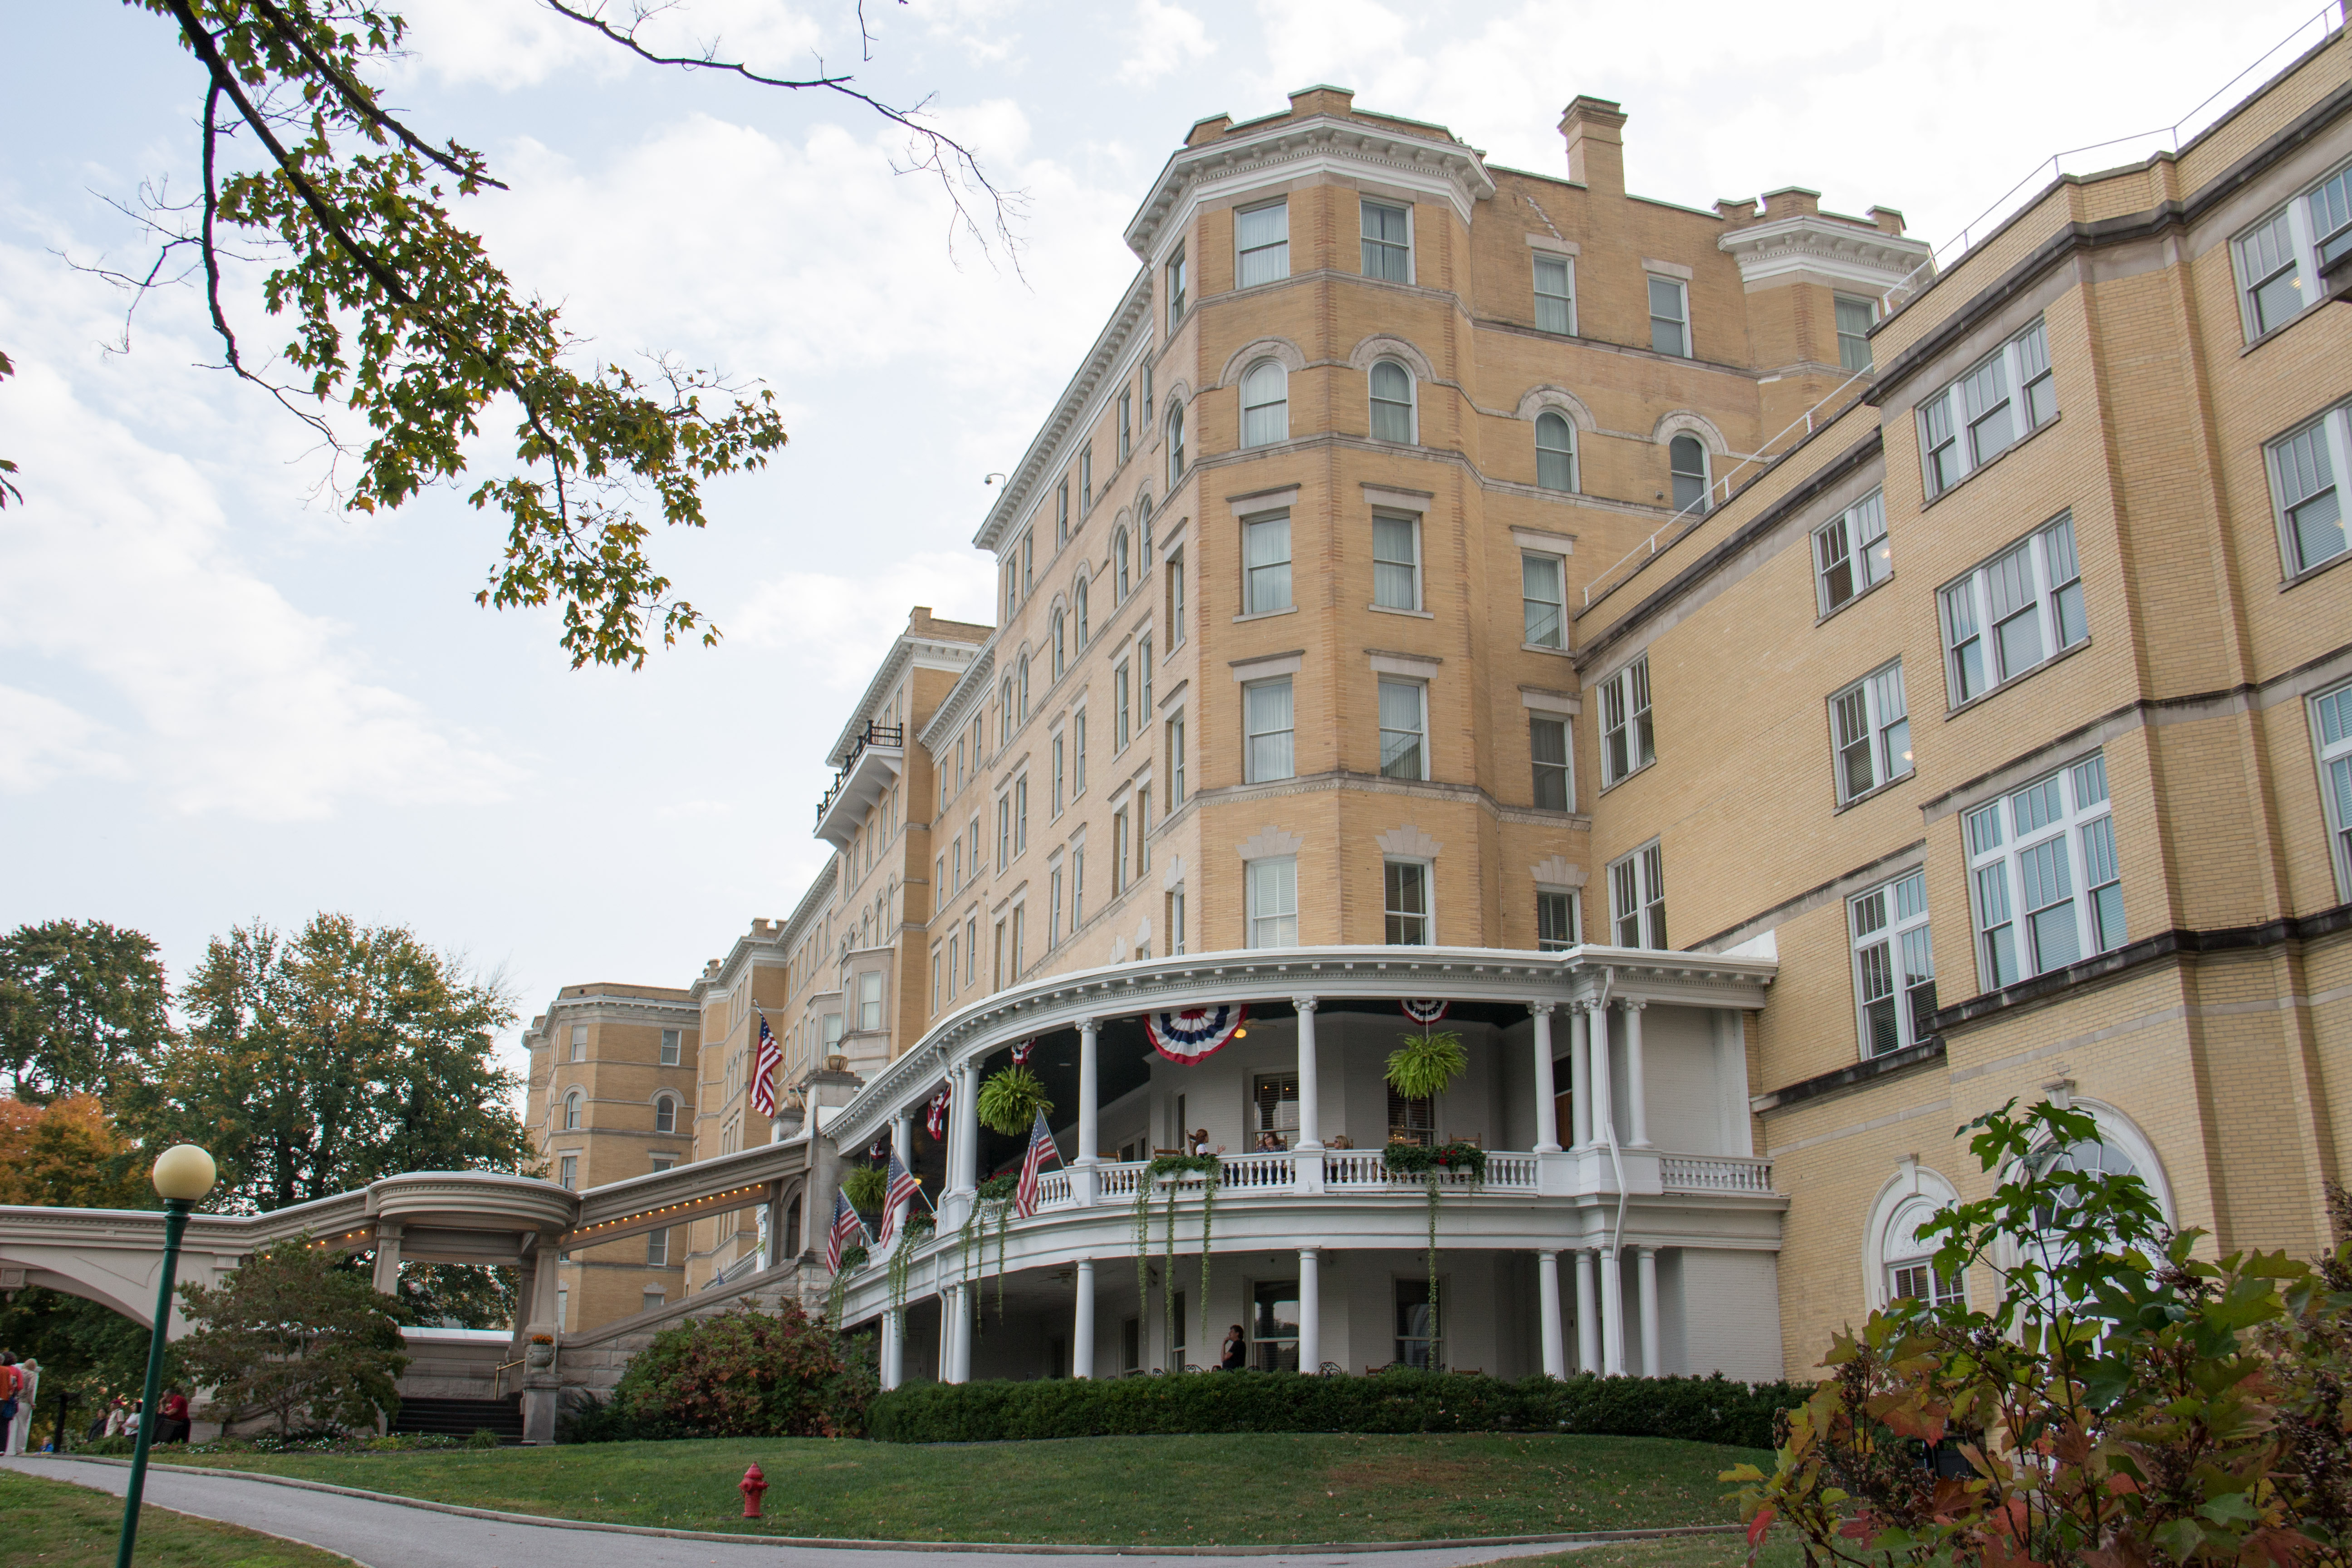 French Lick Springs Hotel exterior